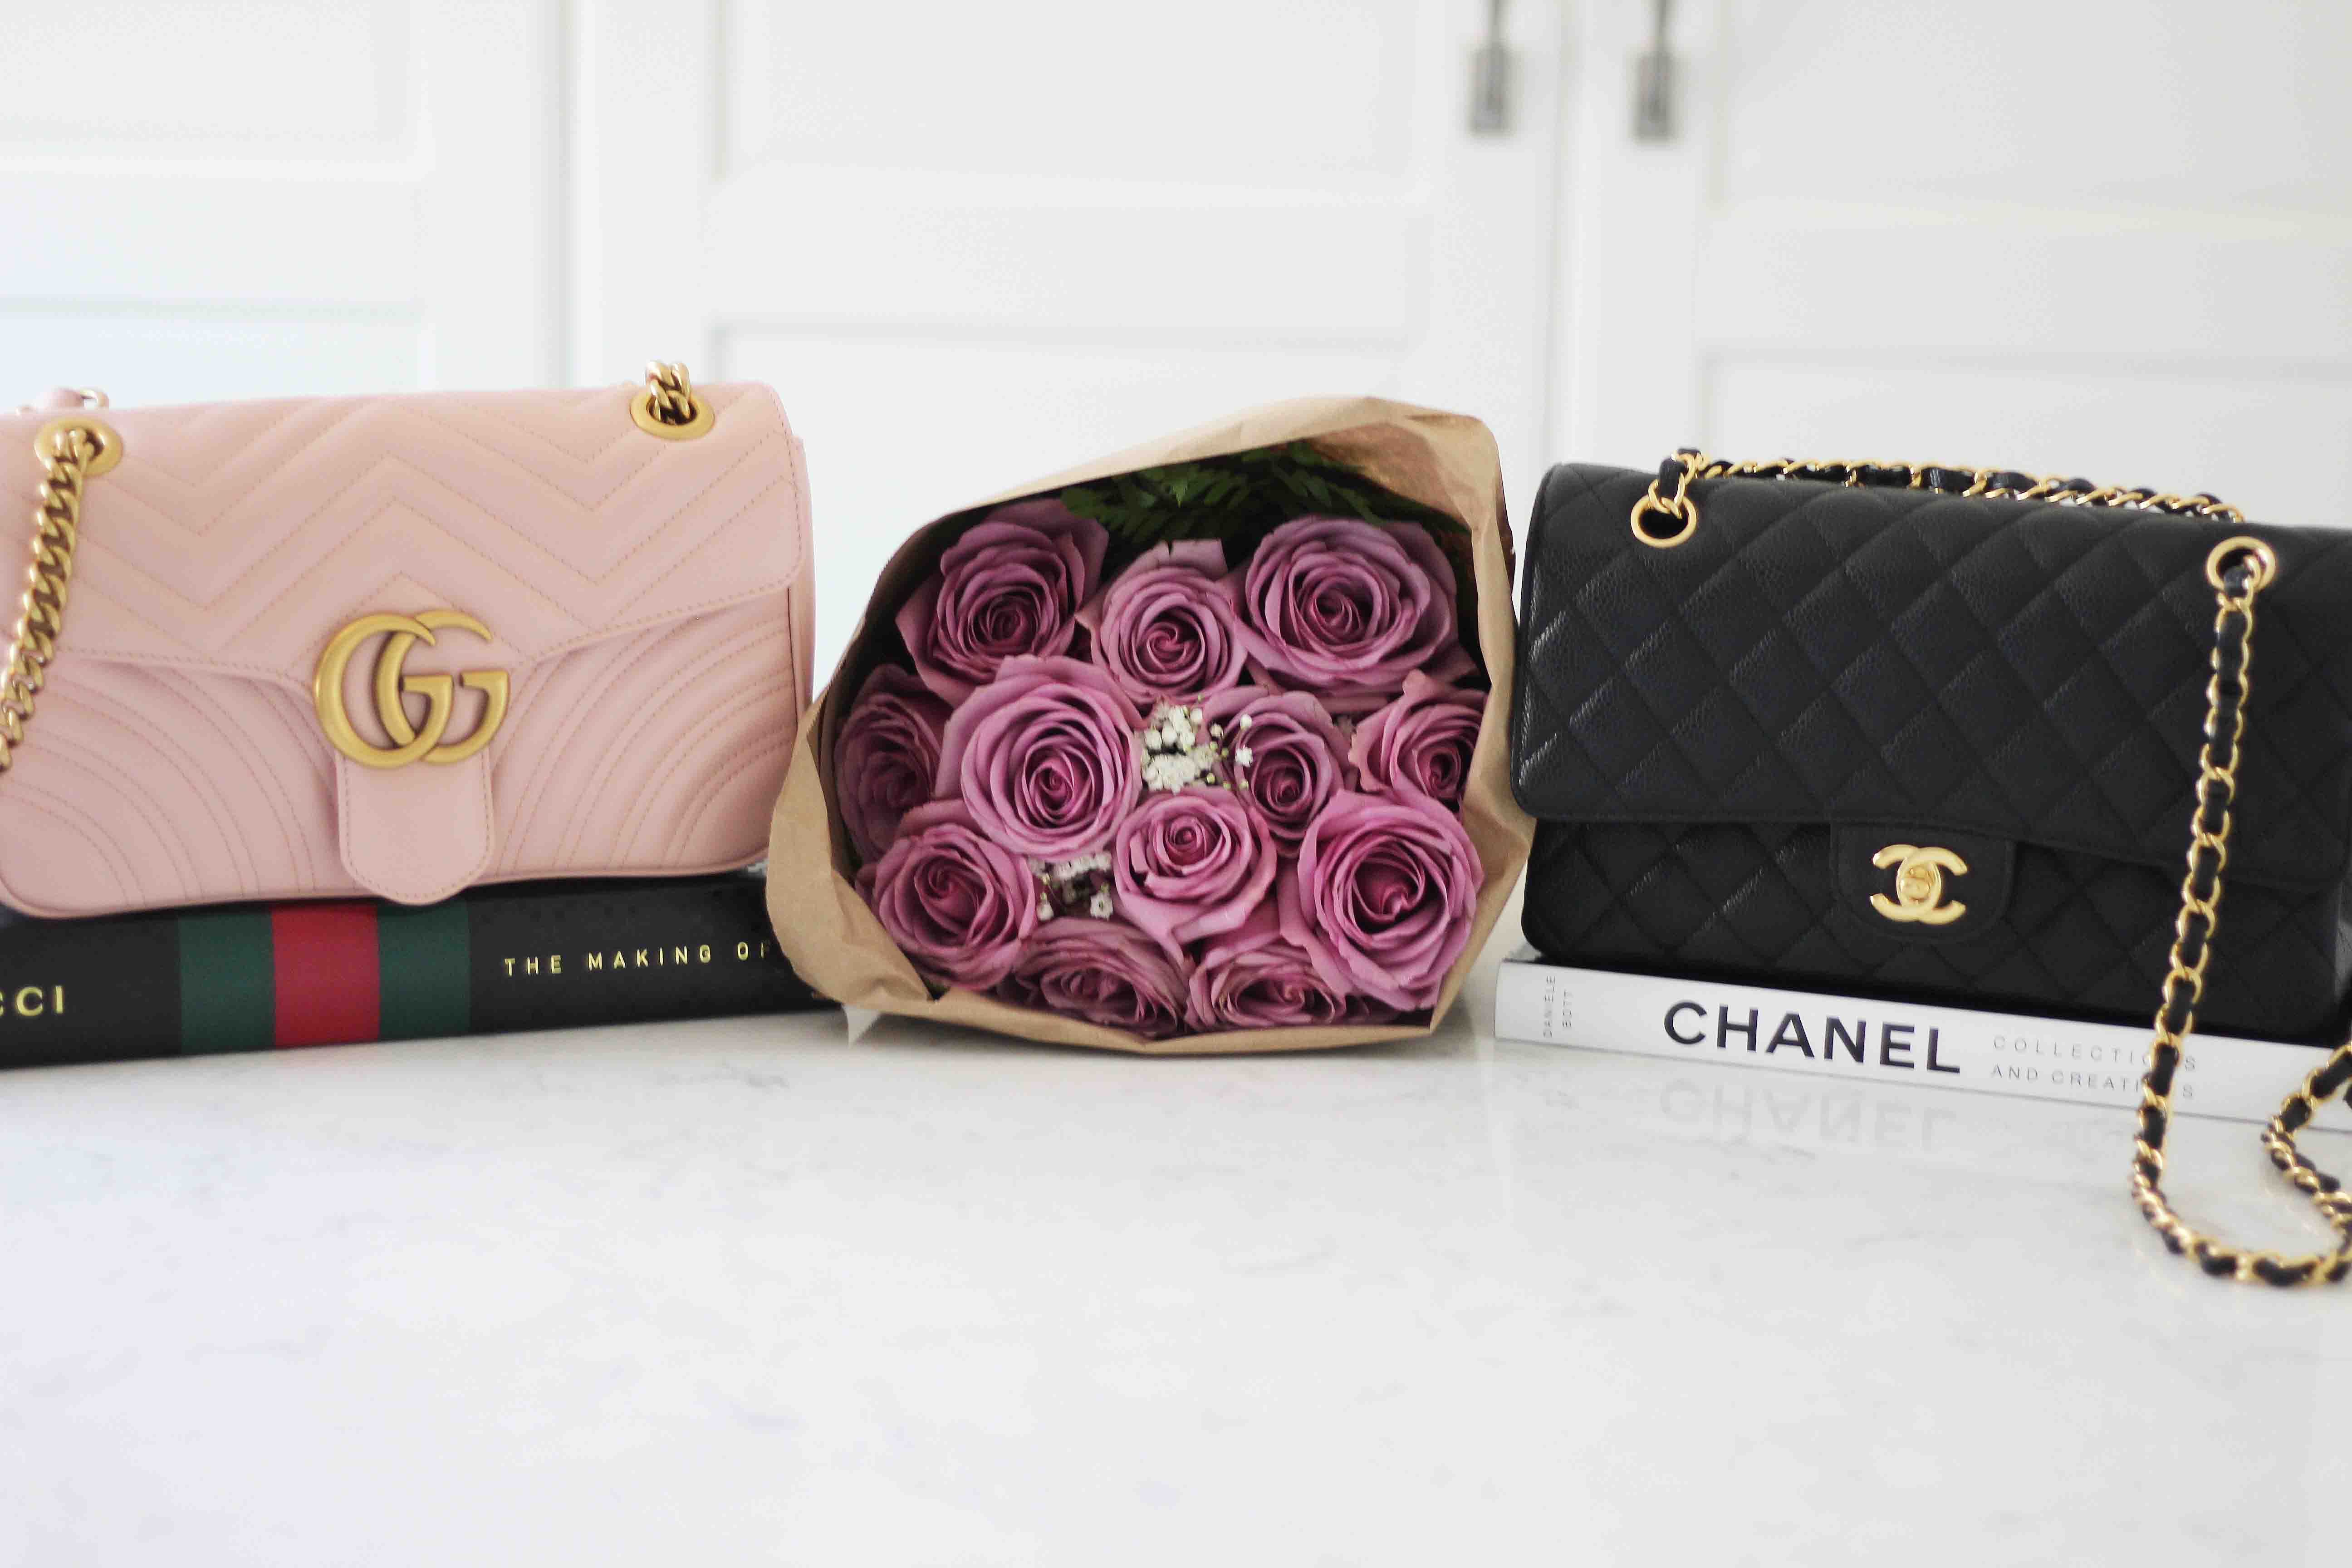 Comparing the Gucci GG Matelassé to the Chanel Classic Flap Bag